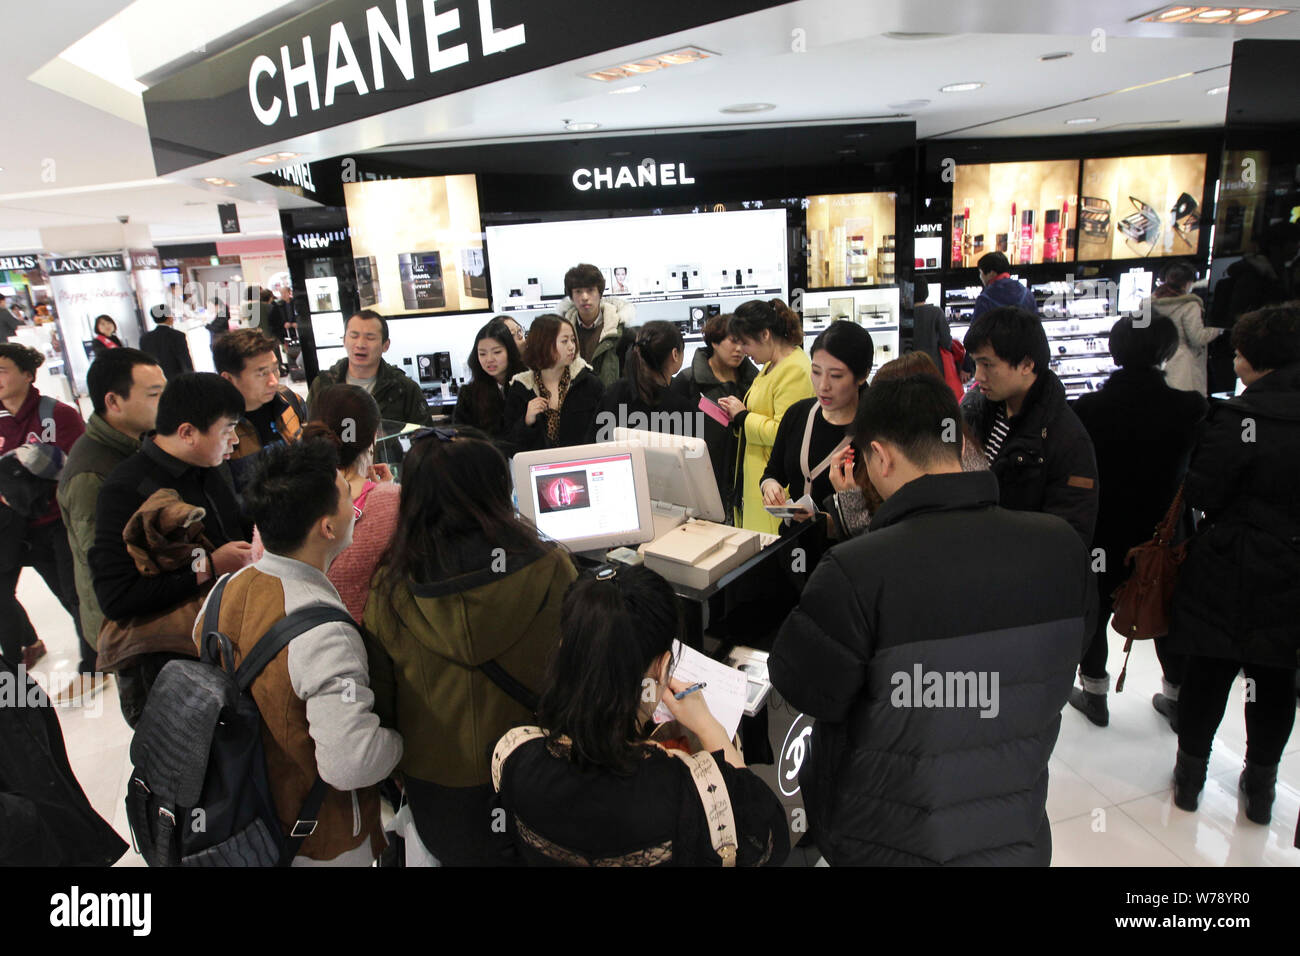 Chanel Frenzy in South Korea People Camping Outside the Store